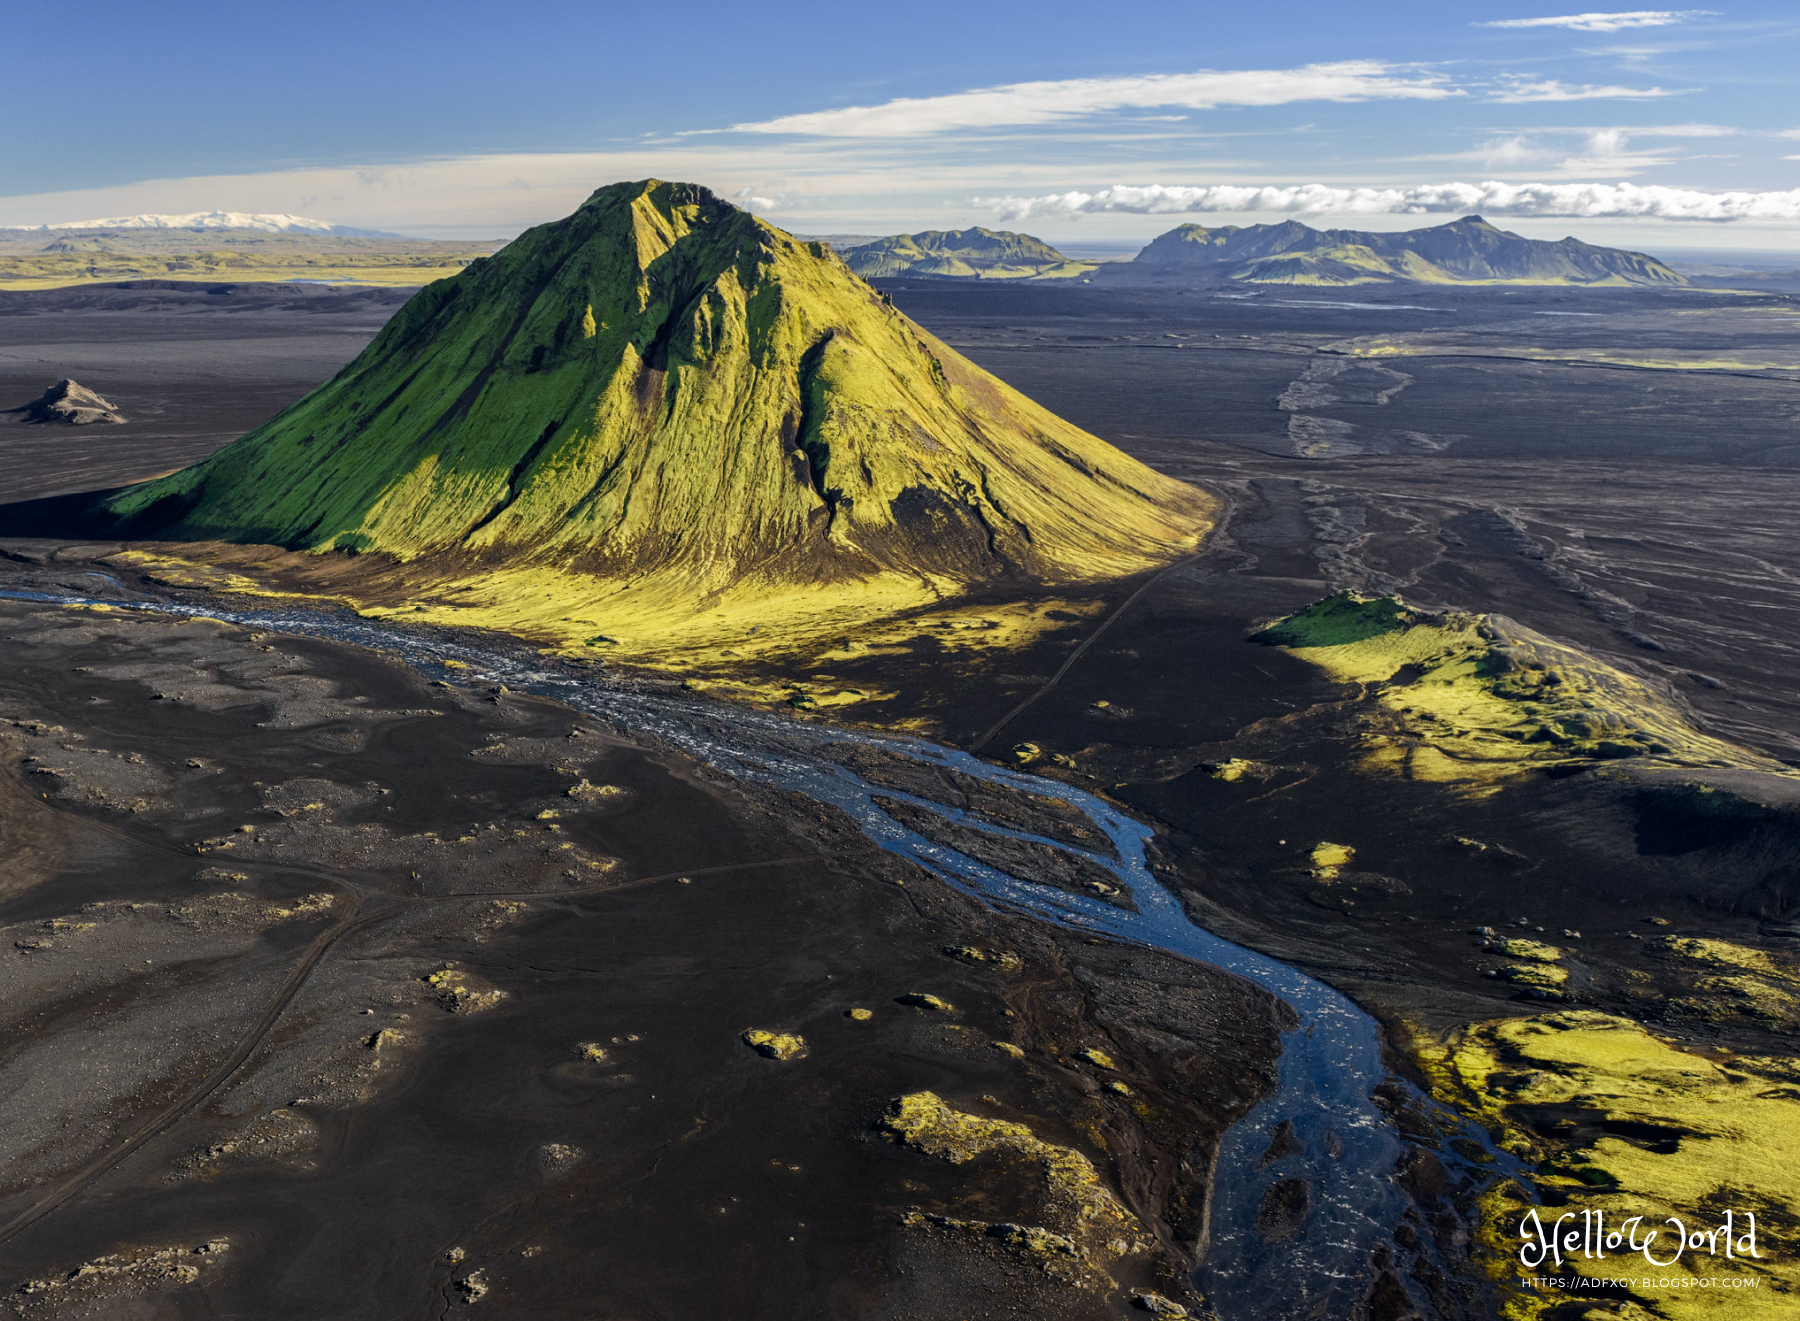 Let's travel to wonderful Iceland in 2023